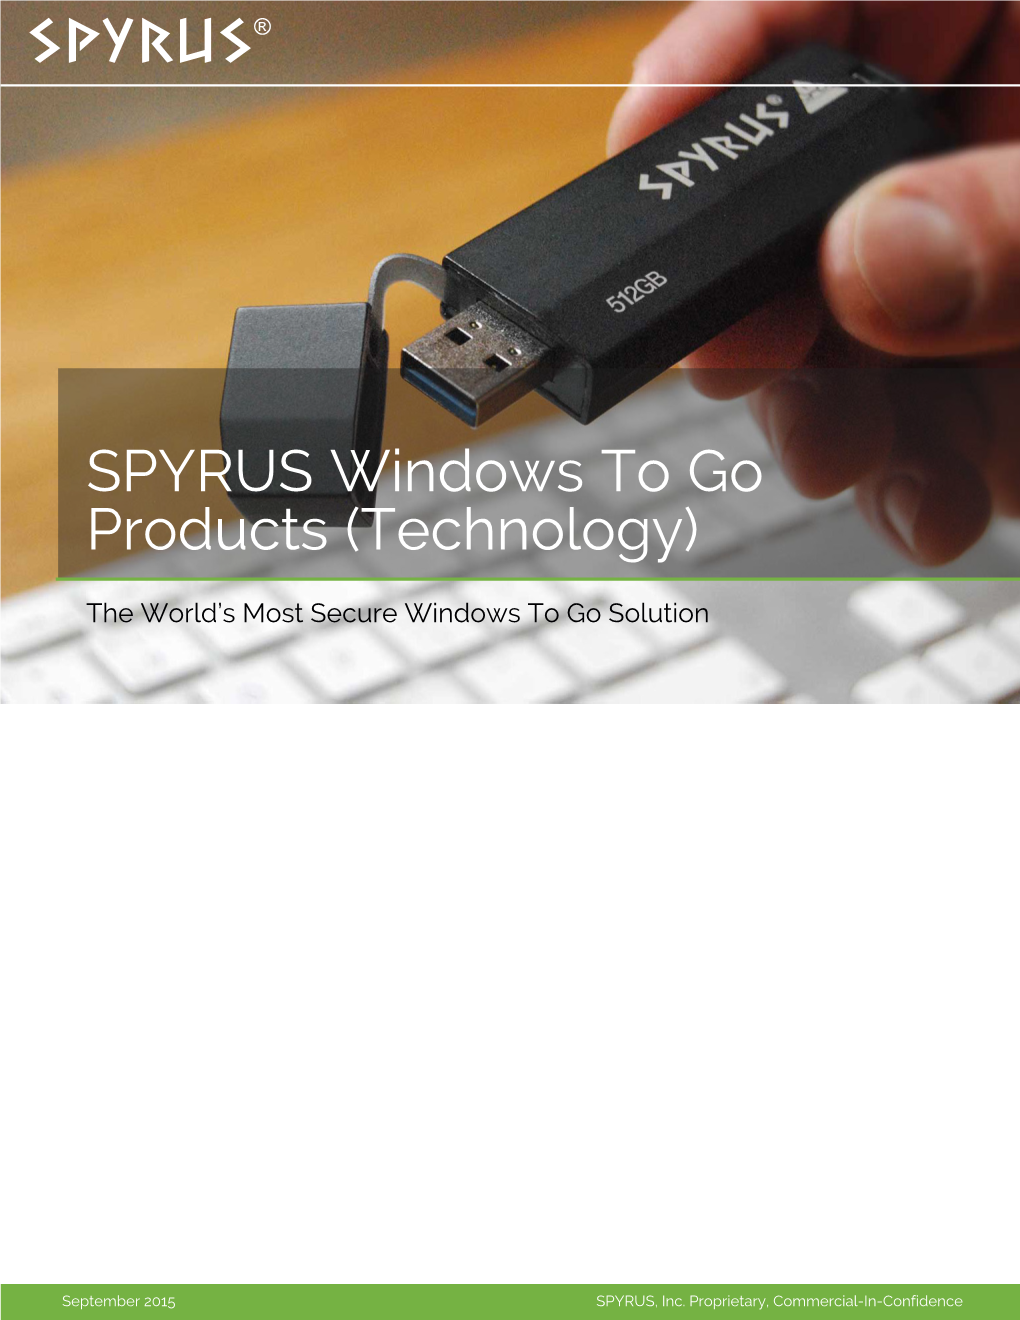 SPYRUS Windows to Go Products (Technology)